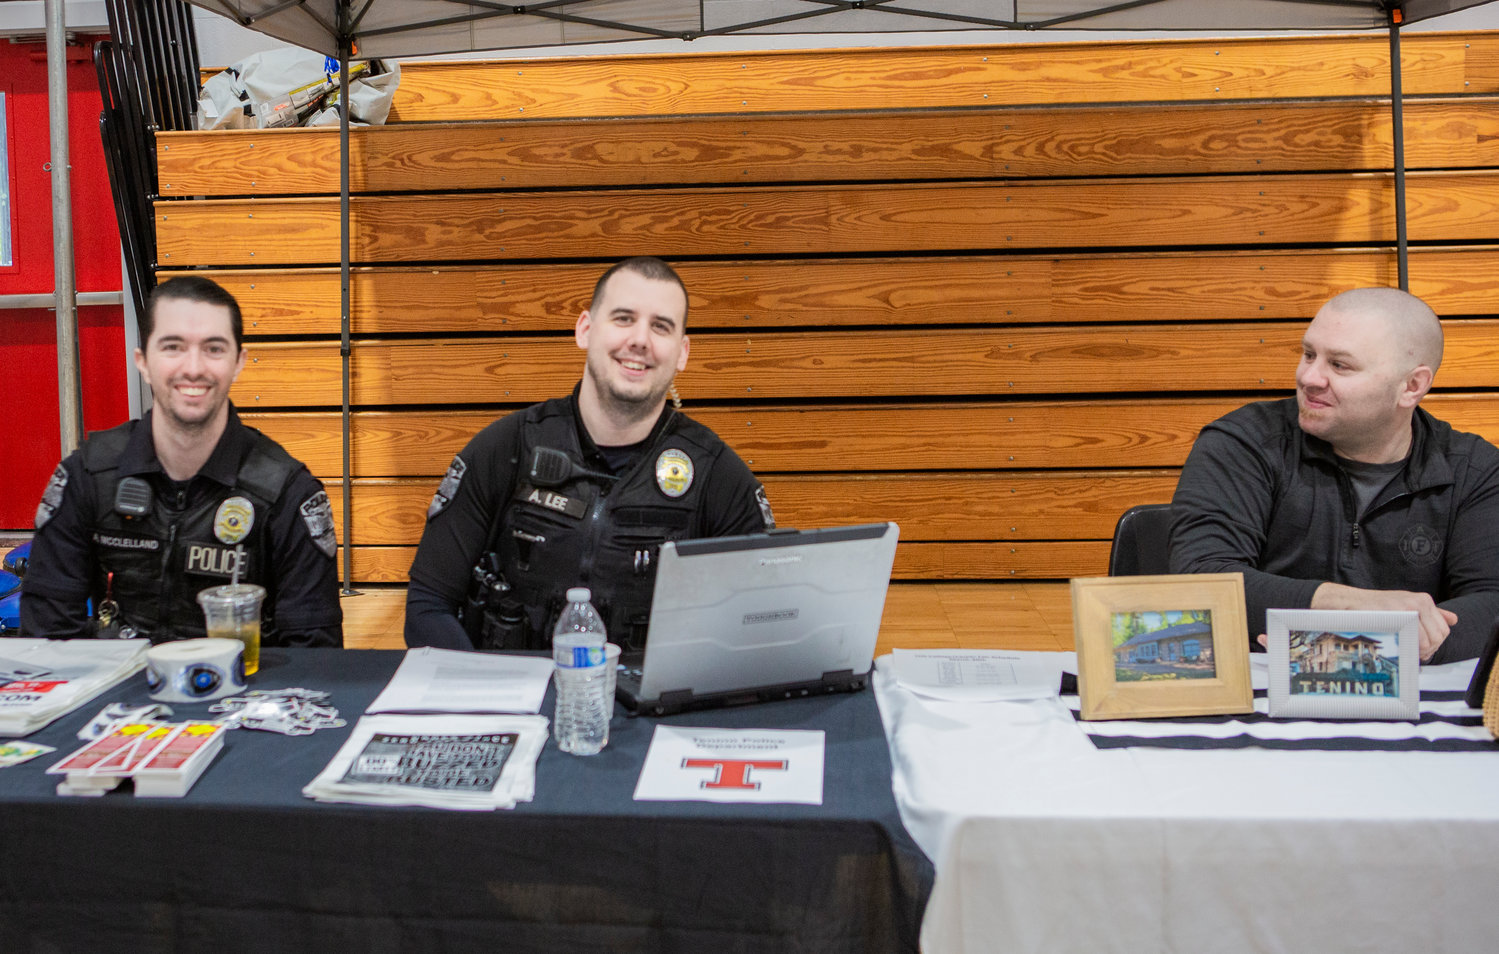 Tenino police officers Alec McClelland and Aaron Lee smile as Mayor Wayne Fournier looks toward them during a college and career fair at Tenino High School on Thursday.